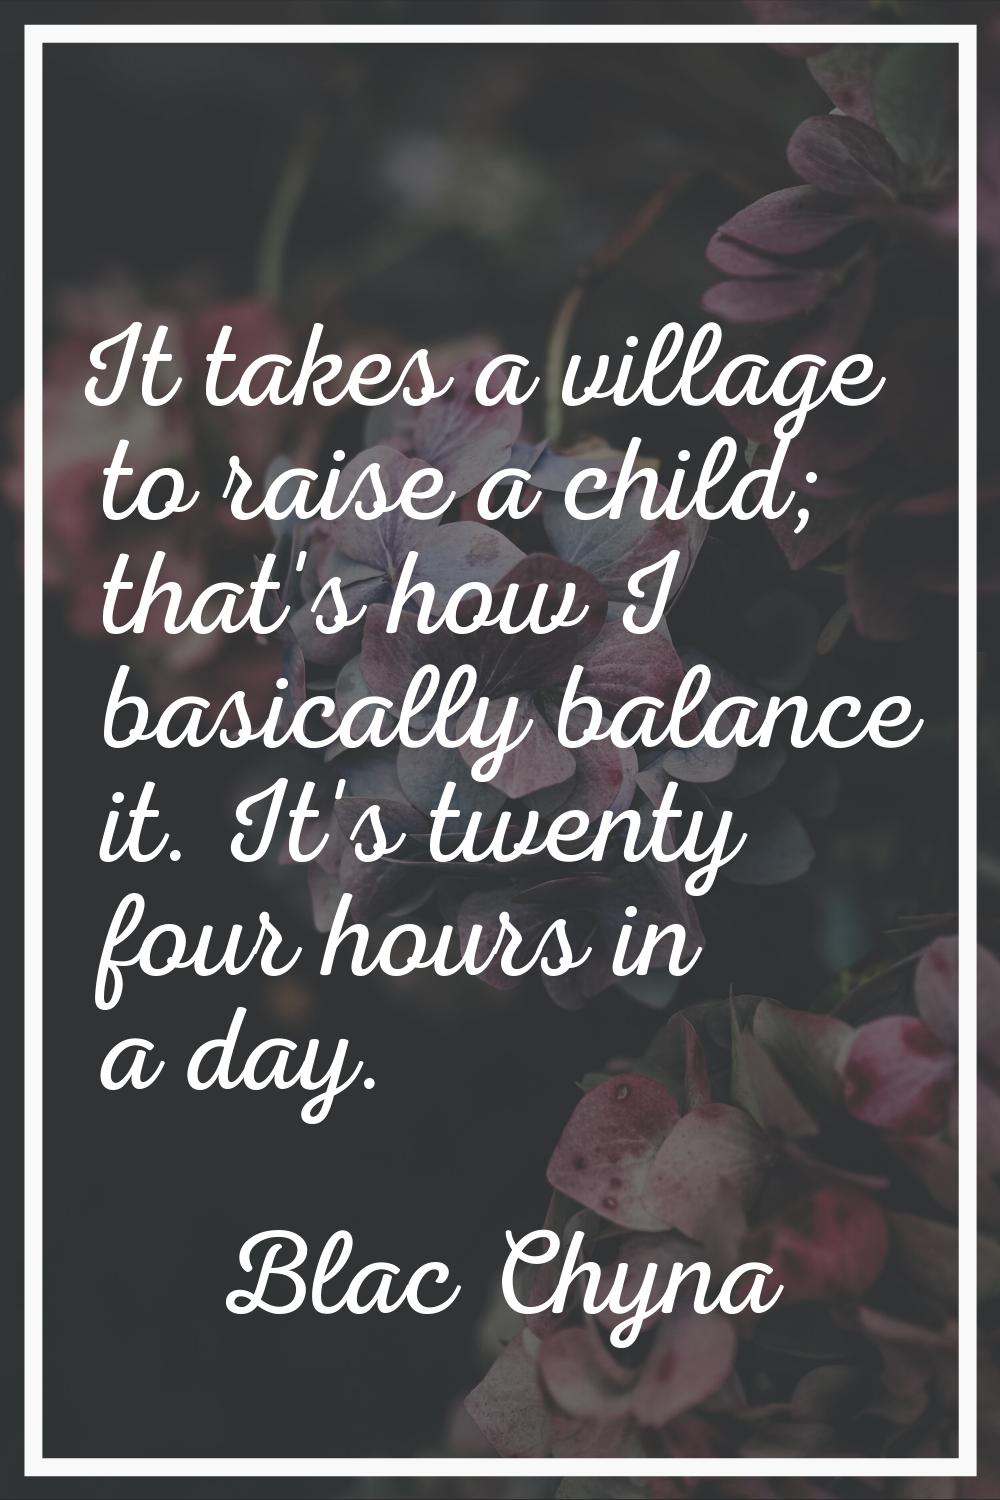 It takes a village to raise a child; that's how I basically balance it. It's twenty four hours in a